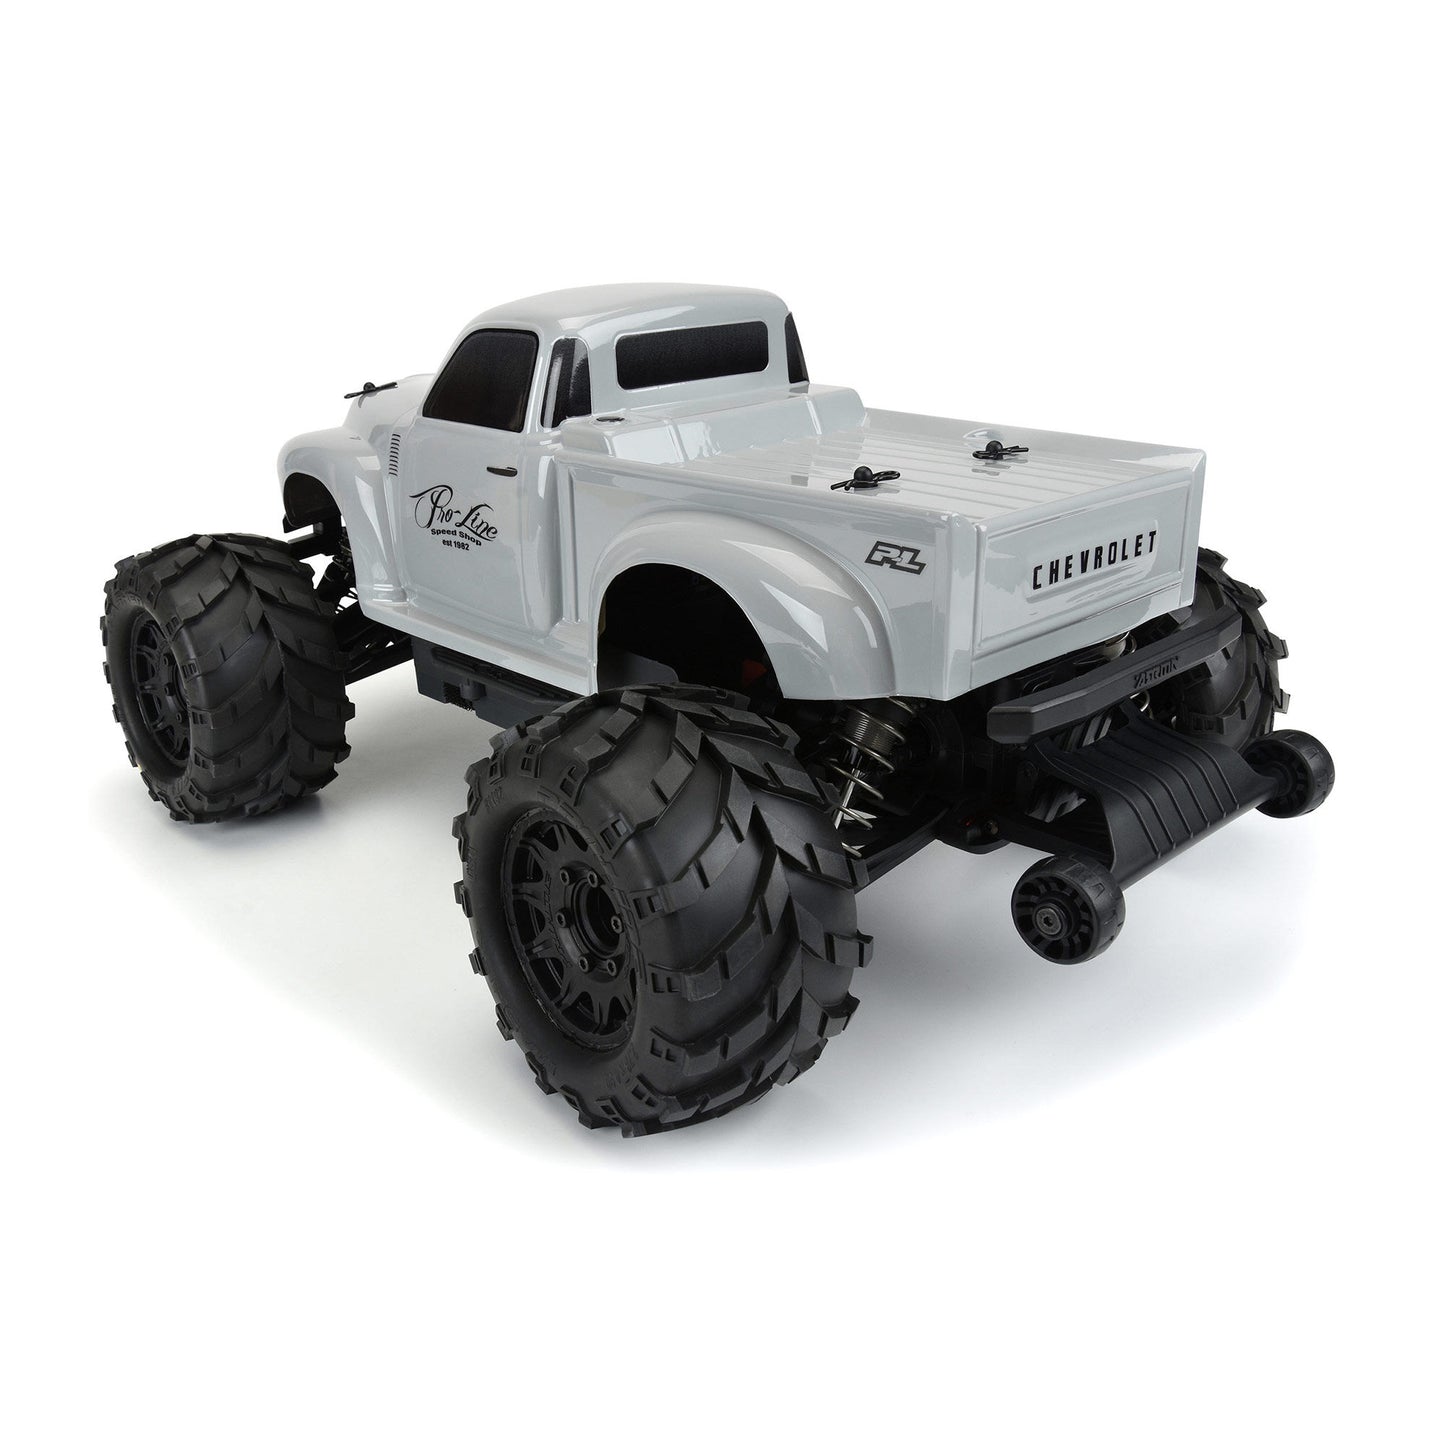 1/10 Pro-Line Early 50's Chevy Tough-Color Gray Body: Stampede & Granite